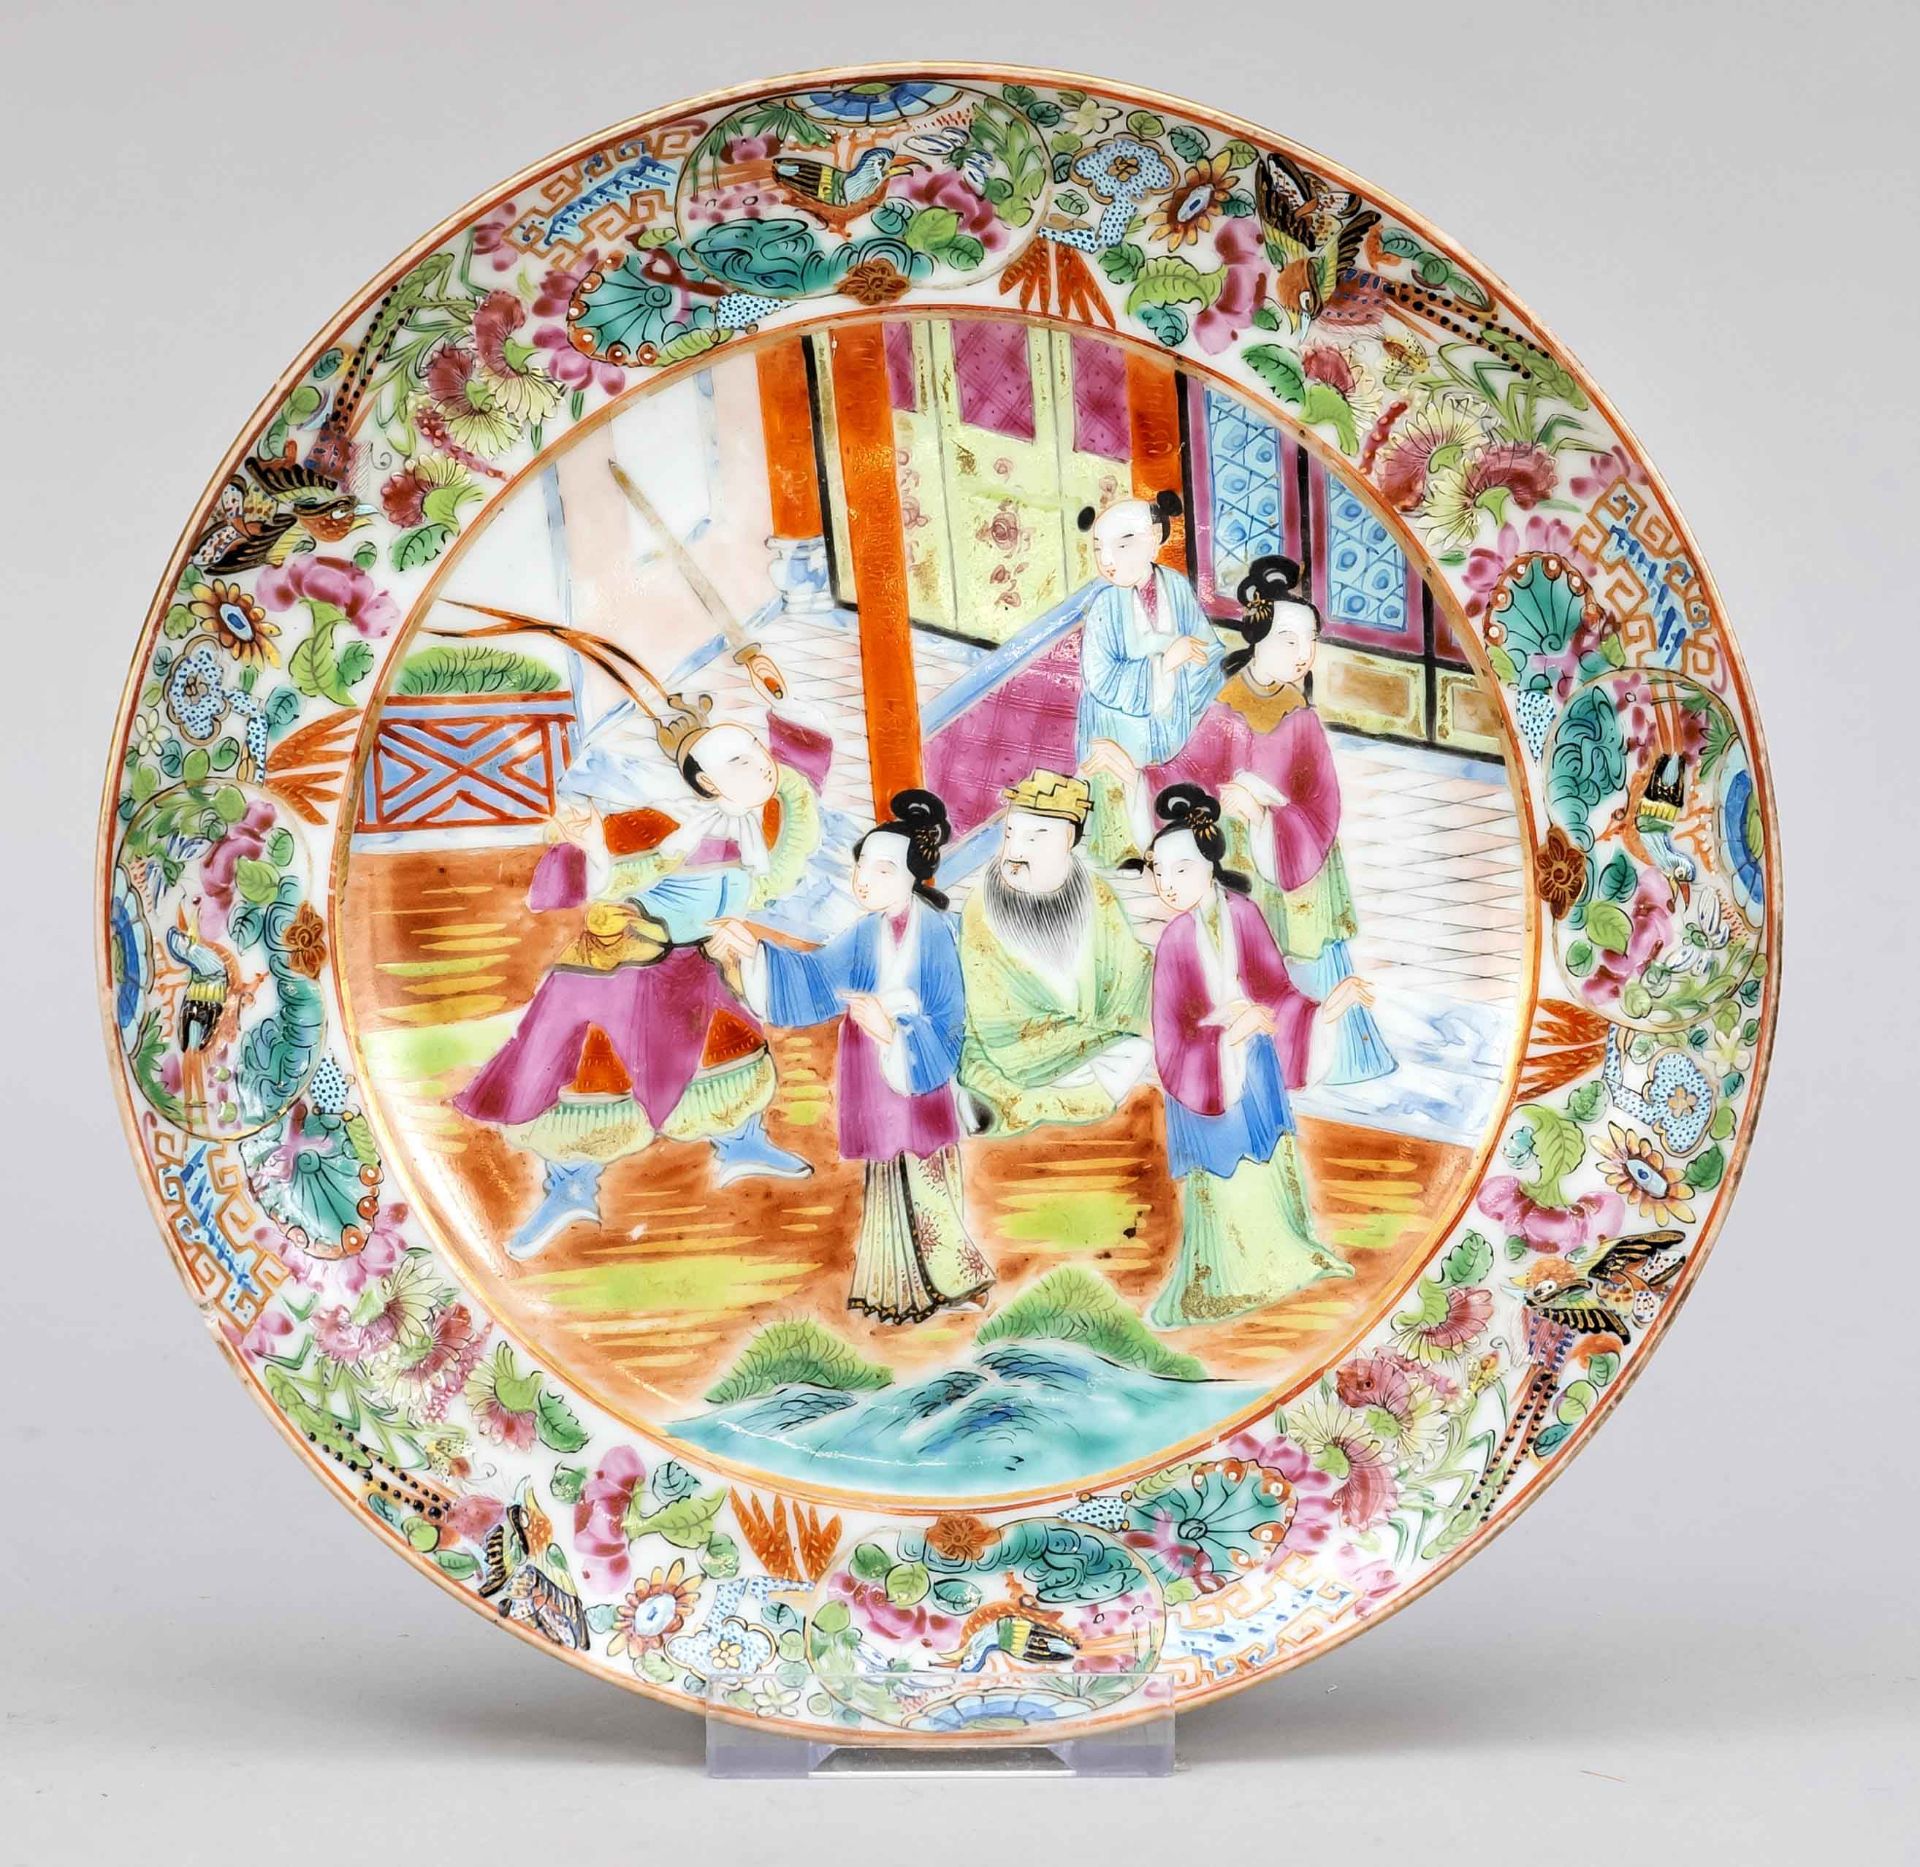 Famille Rose plate, China (Canton), 19th century (Qing). In the mirror a multi-figure palace